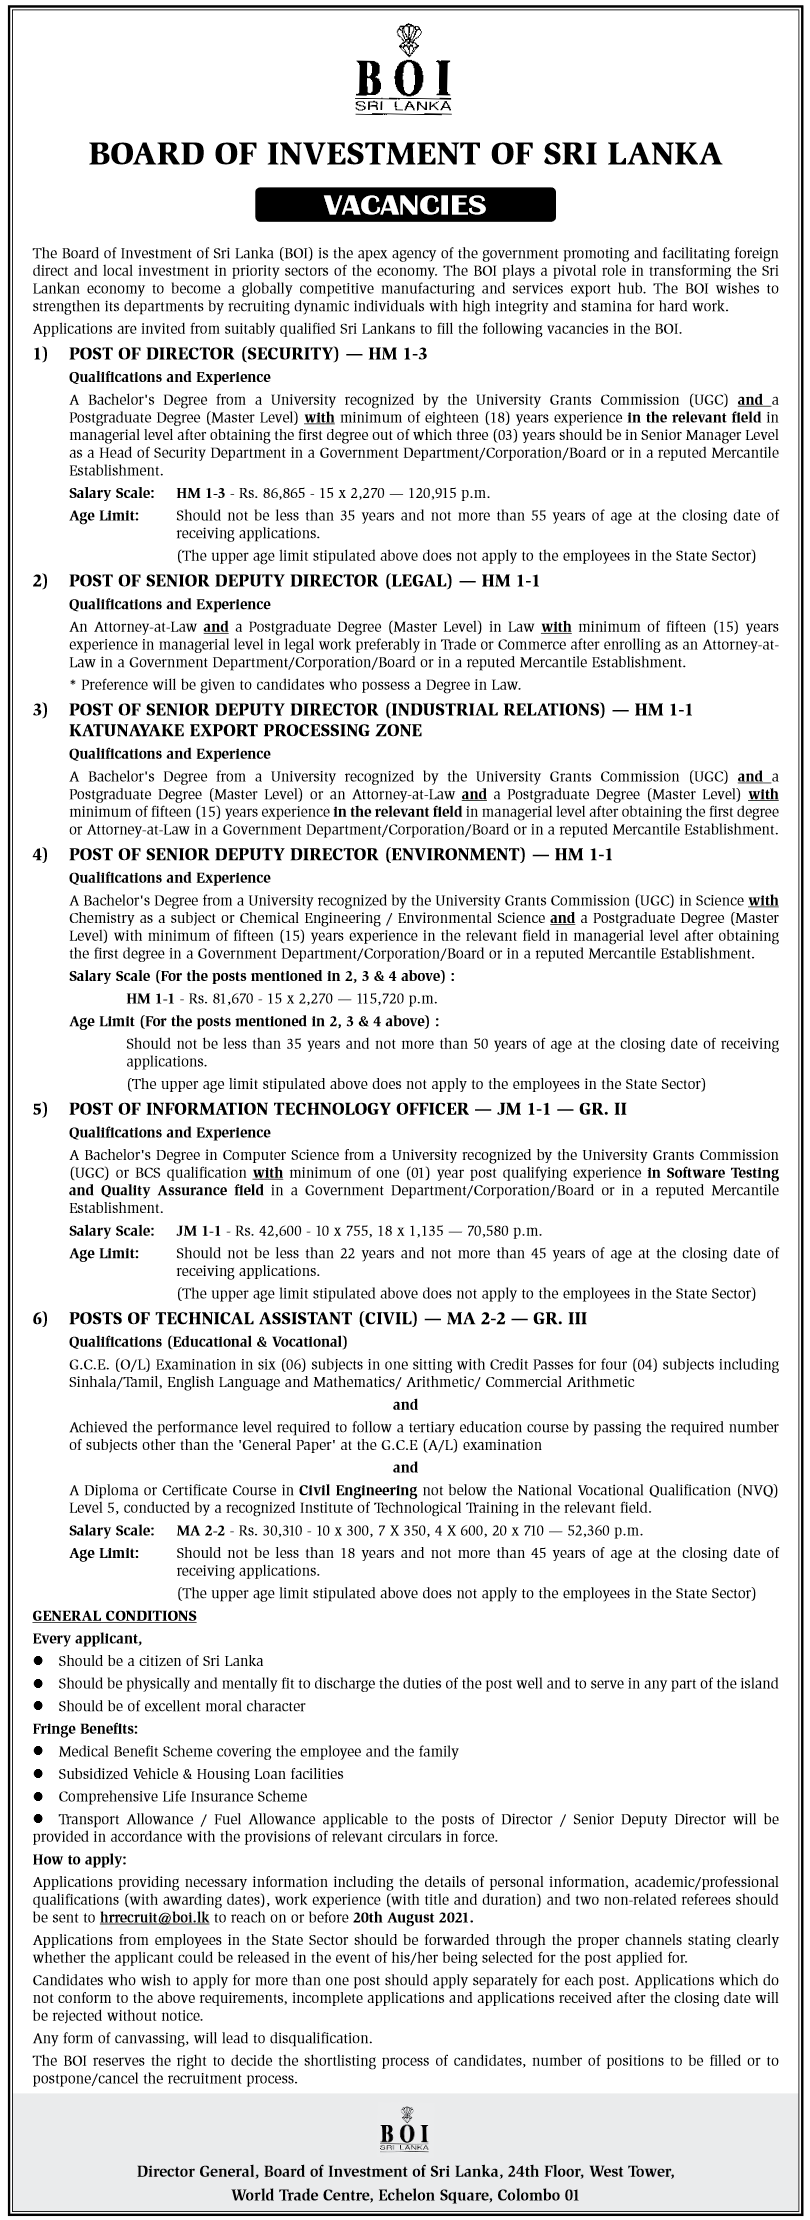 Information Technology Officer, Technical Assistant (Civil), Senior Deputy Director (Legal, Industrial Relations, Environment), Director (Security) 2021 – Board of Investment of Sri Lanka